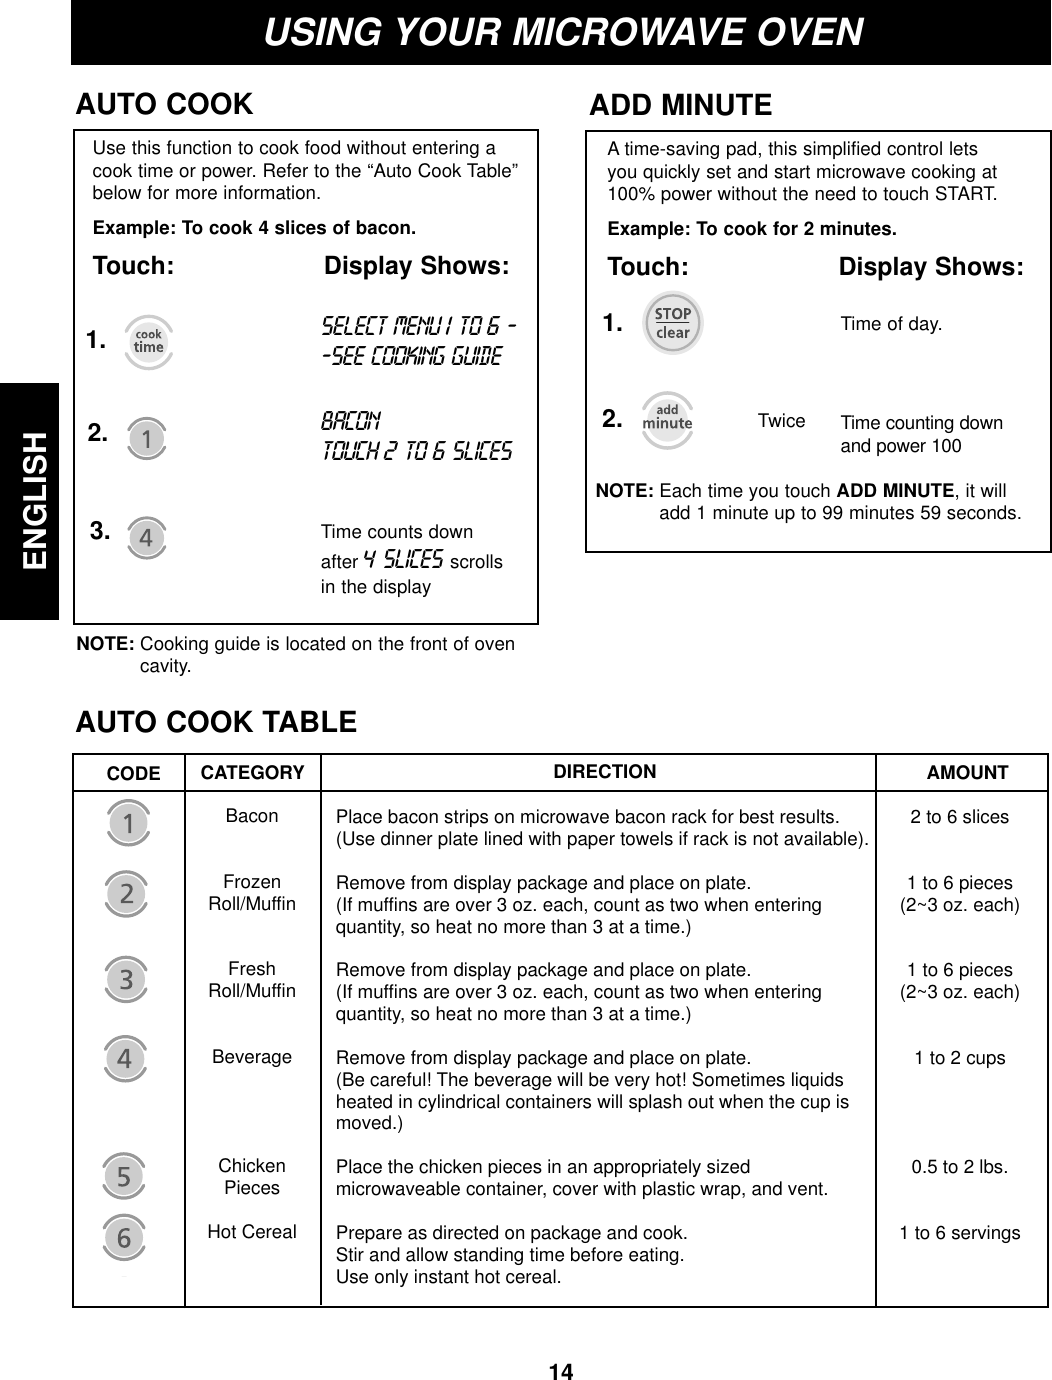 14ENGLISHTime of day.TwiceUSING YOUR MICROWAVE OVENADD MINUTEA time-saving pad, this simplified control letsyou quickly set and start microwave cooking at100% power without the need to touch START.Example: To cook for 2 minutes.Touch: Display Shows:1.2.NOTE: Each time you touch ADD MINUTE, it willadd 1 minute up to 99 minutes 59 seconds.Time counting downand power 100AUTO COOKAUTO COOK TABLEUse this function to cook food without entering acook time or power. Refer to the “Auto Cook Table”below for more information.Example: To cook 4 slices of bacon.Touch: Display Shows:1.Time counts downafter 4SLICESscrollsin the display2.BACON TOUCH 2TO 6SLICES3.SELECT MENU1 TO 6 --SEE COOKING GUIDE DIRECTIONCODE CATEGORYBaconFrozenRoll/MuffinFreshRoll/MuffinBeverageChickenPiecesHot Cereal AMOUNT2 to 6 slices1 to 6 pieces(2~3 oz. each)1 to 6 pieces(2~3 oz. each)1 to 2 cups0.5 to 2 lbs.1 to 6 servingsPlace bacon strips on microwave bacon rack for best results.(Use dinner plate lined with paper towels if rack is not available).Remove from display package and place on plate.(If muffins are over 3 oz. each, count as two when enteringquantity, so heat no more than 3 at a time.)Remove from display package and place on plate.(If muffins are over 3 oz. each, count as two when enteringquantity, so heat no more than 3 at a time.)Remove from display package and place on plate.(Be careful! The beverage will be very hot! Sometimes liquidsheated in cylindrical containers will splash out when the cup ismoved.)Place the chicken pieces in an appropriately sizedmicrowaveable container, cover with plastic wrap, and vent.Prepare as directed on package and cook.Stir and allow standing time before eating.Use only instant hot cereal.NOTE: Cooking guide is located on the front of ovencavity.